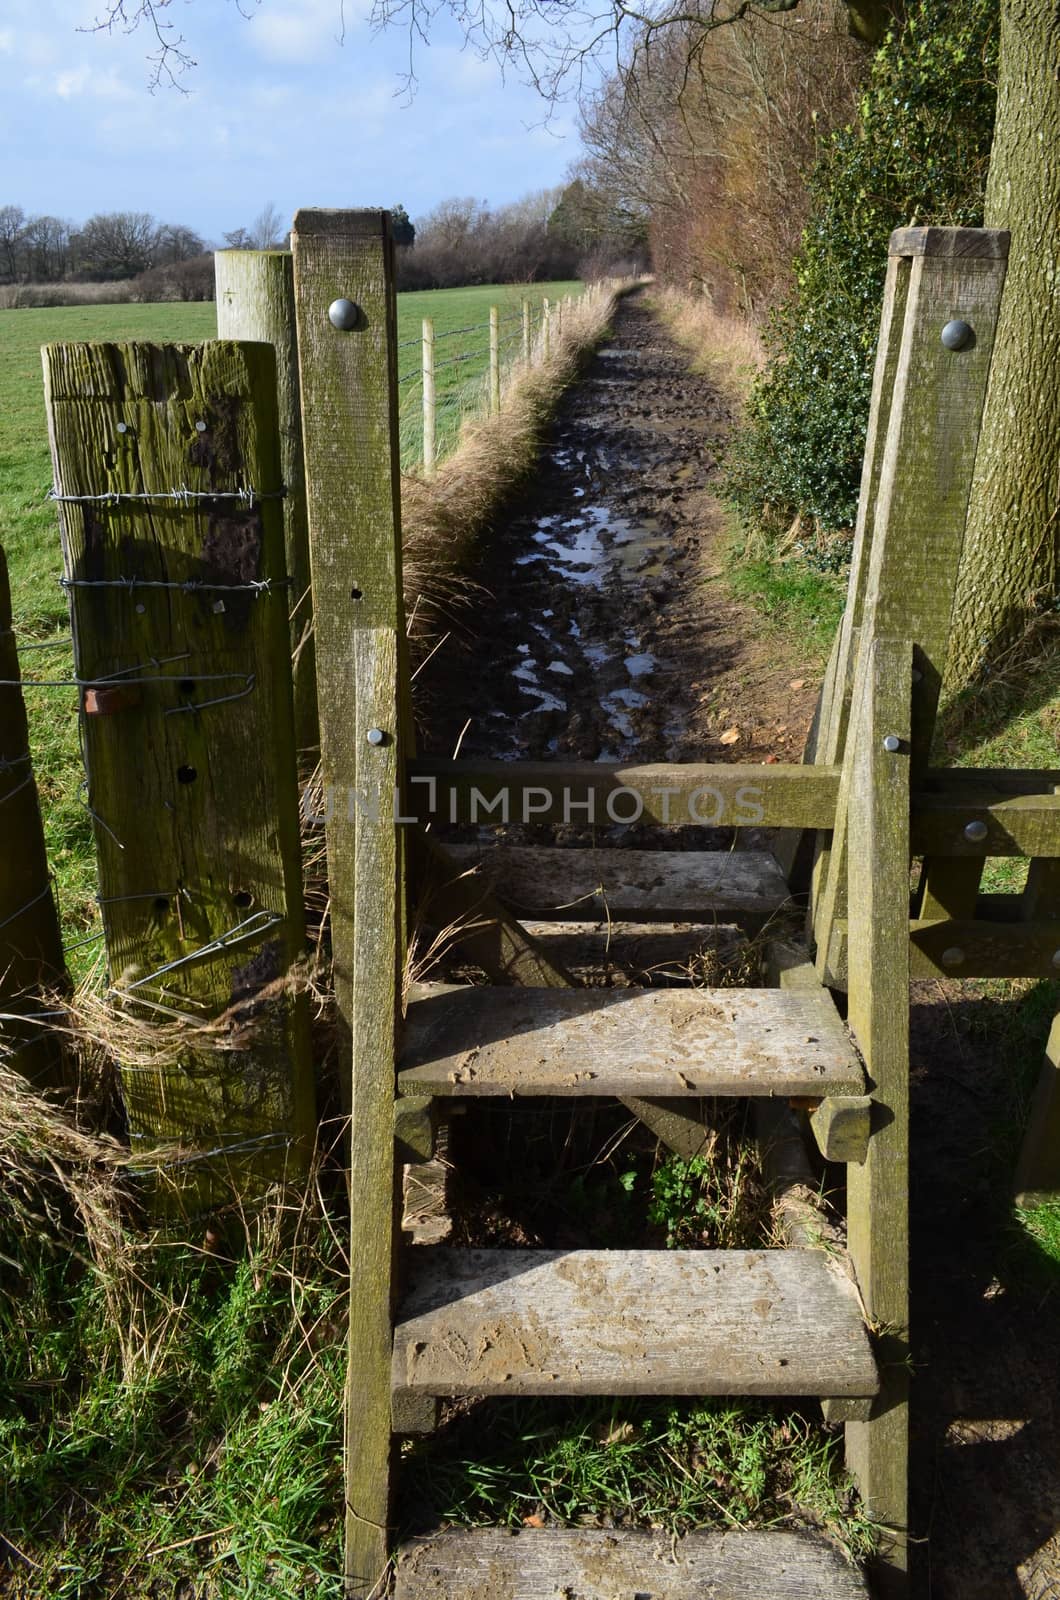 An unusual stile gate in the English countryside.